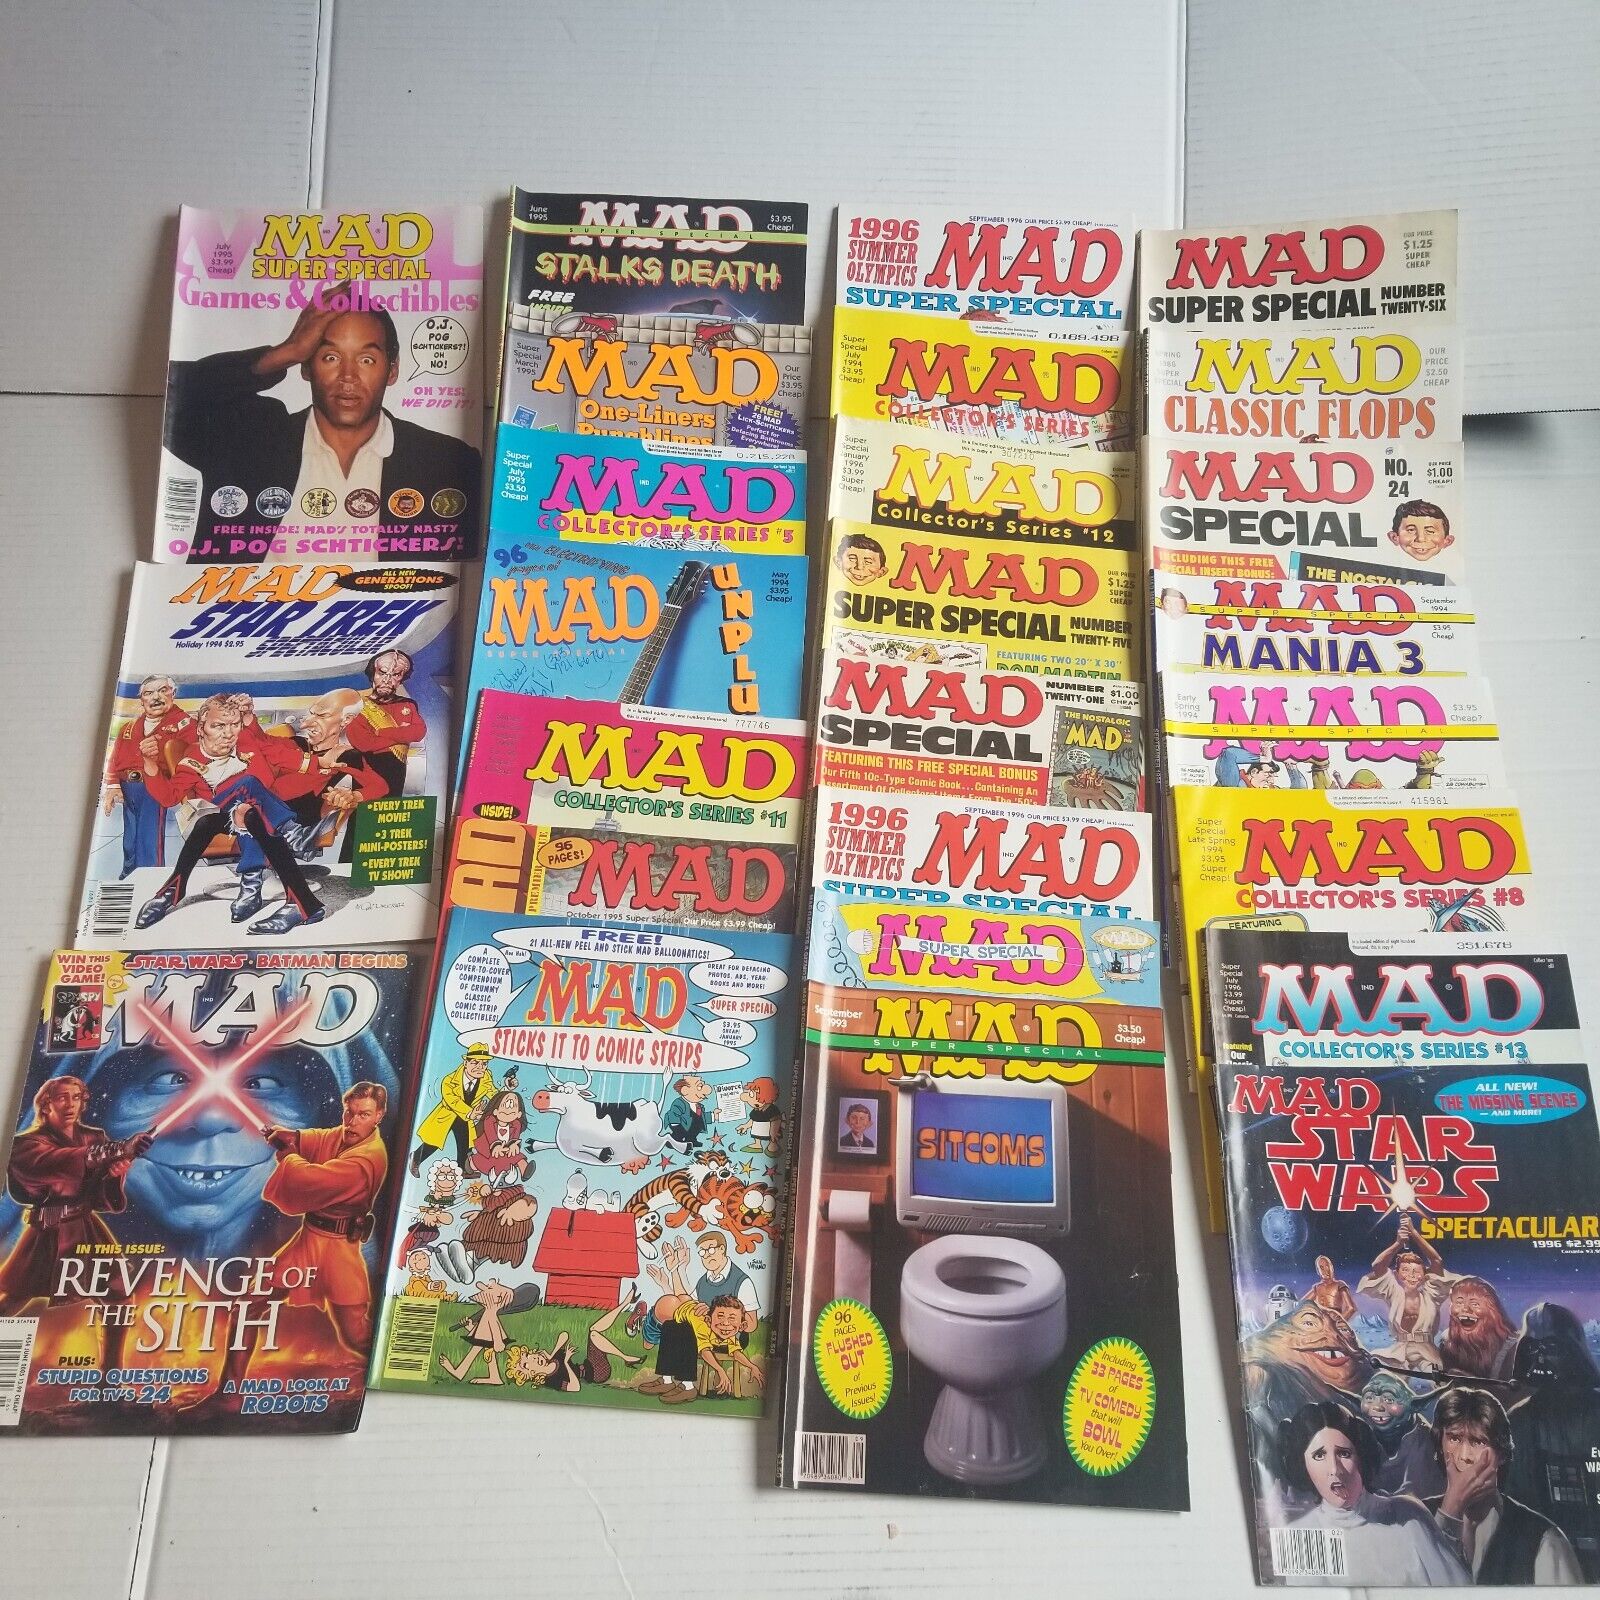 LOT OF 25 VINTAGE COLLECTIBLE MAD MAGAZINE BOOKS